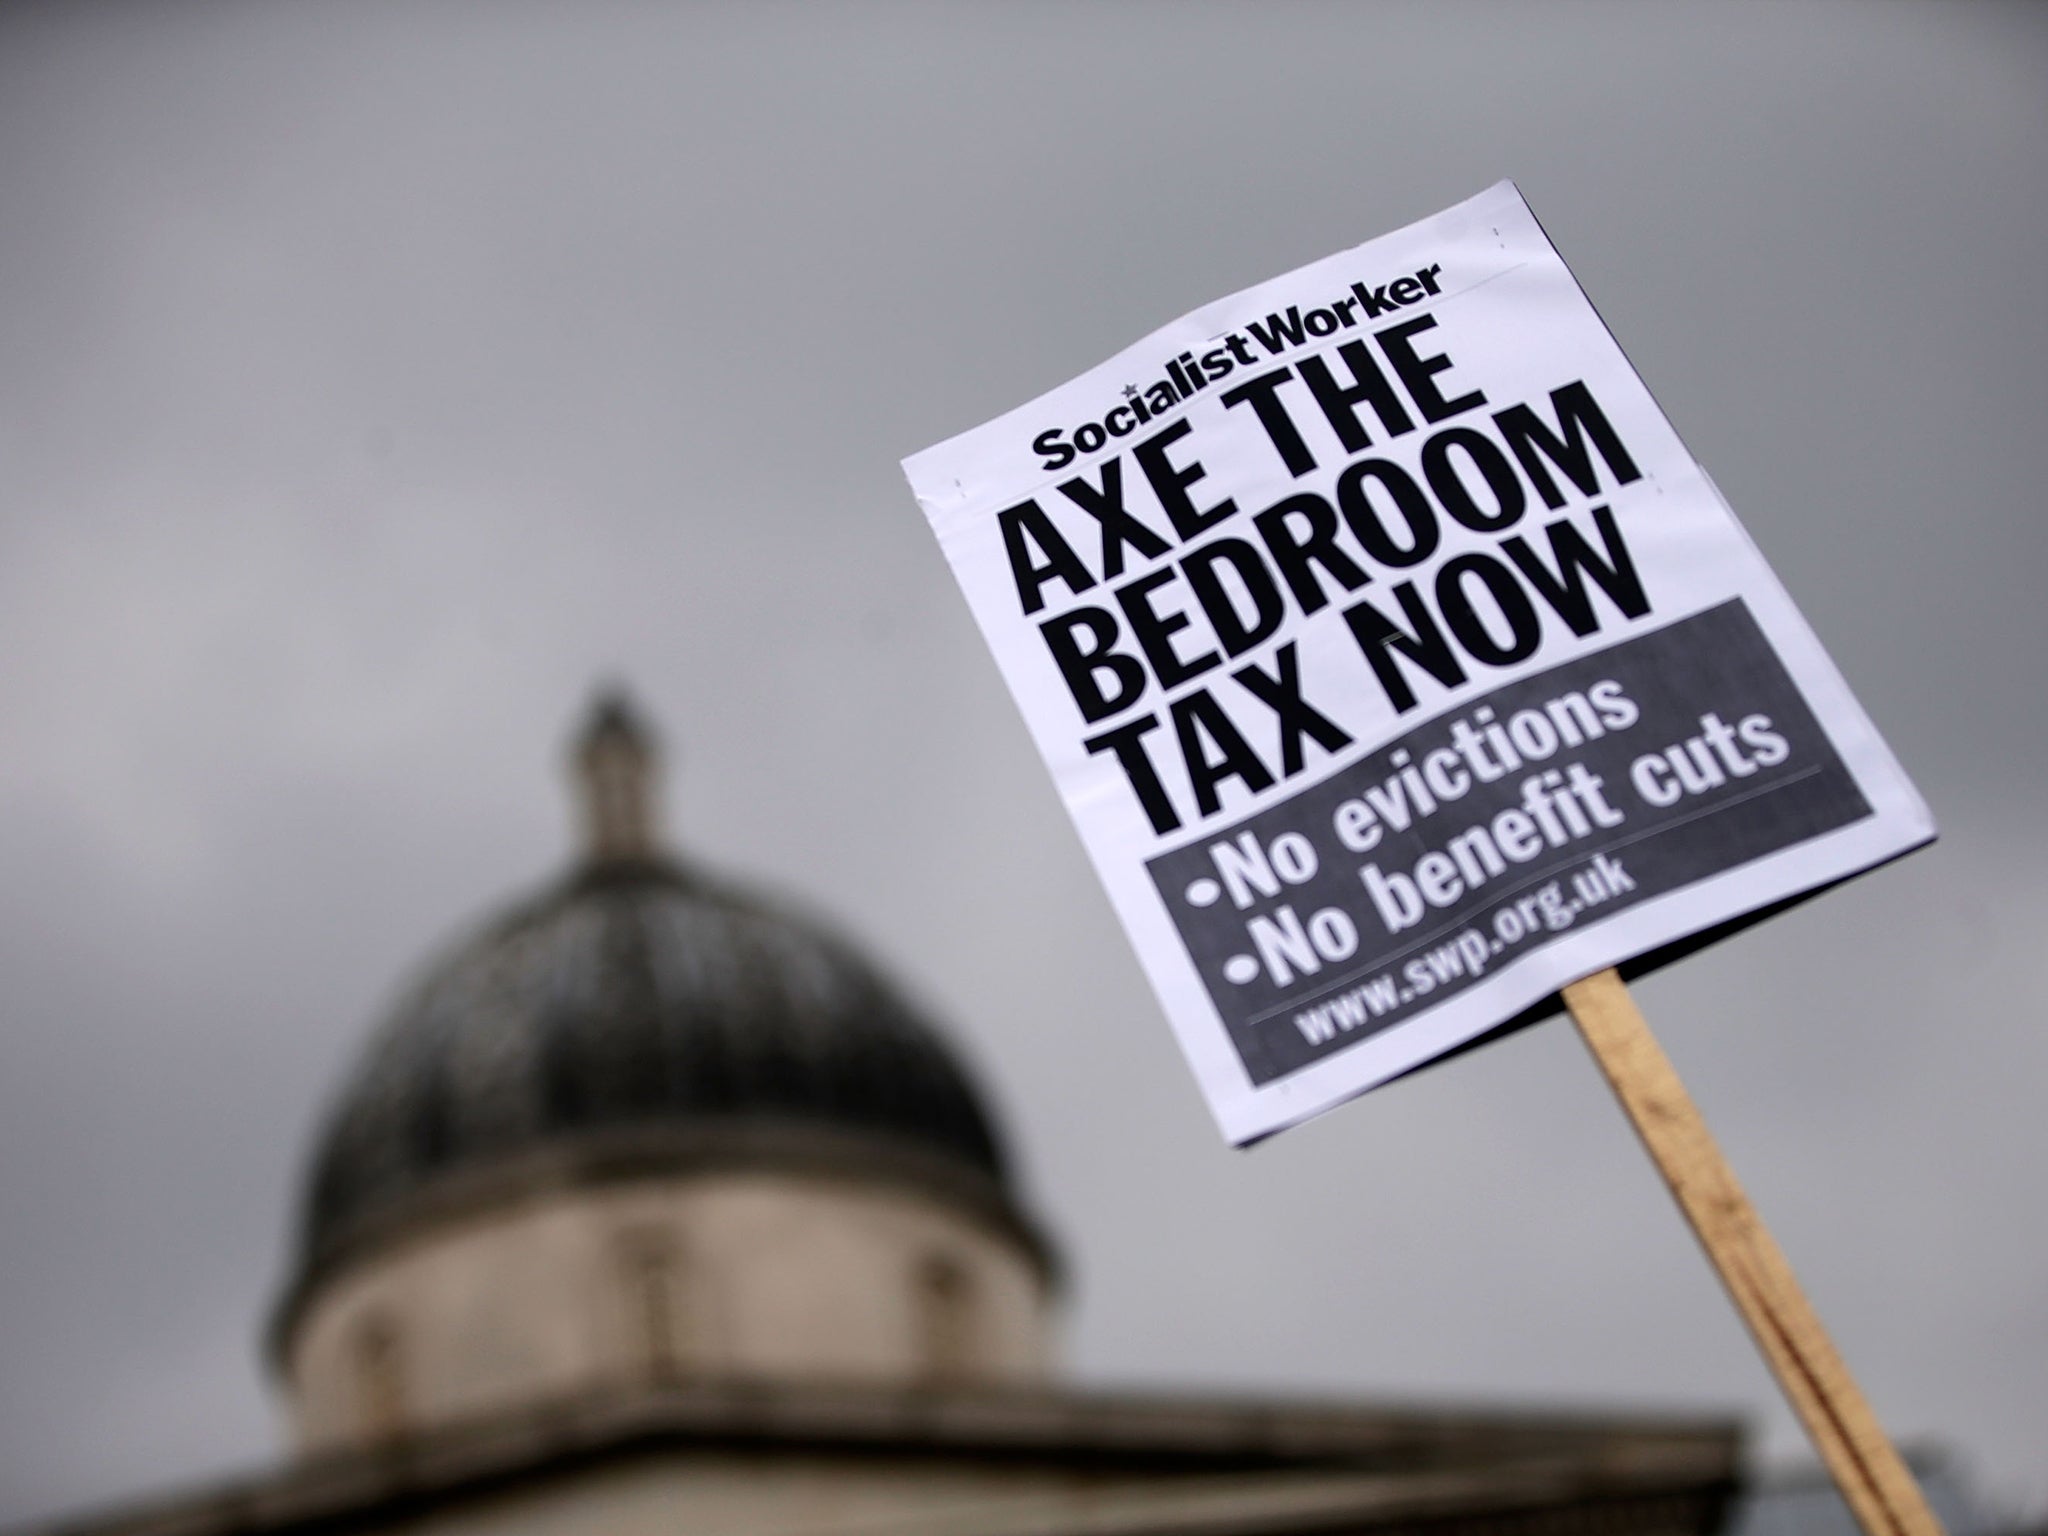 The council can no longer support tenants hit by the bedroom tax